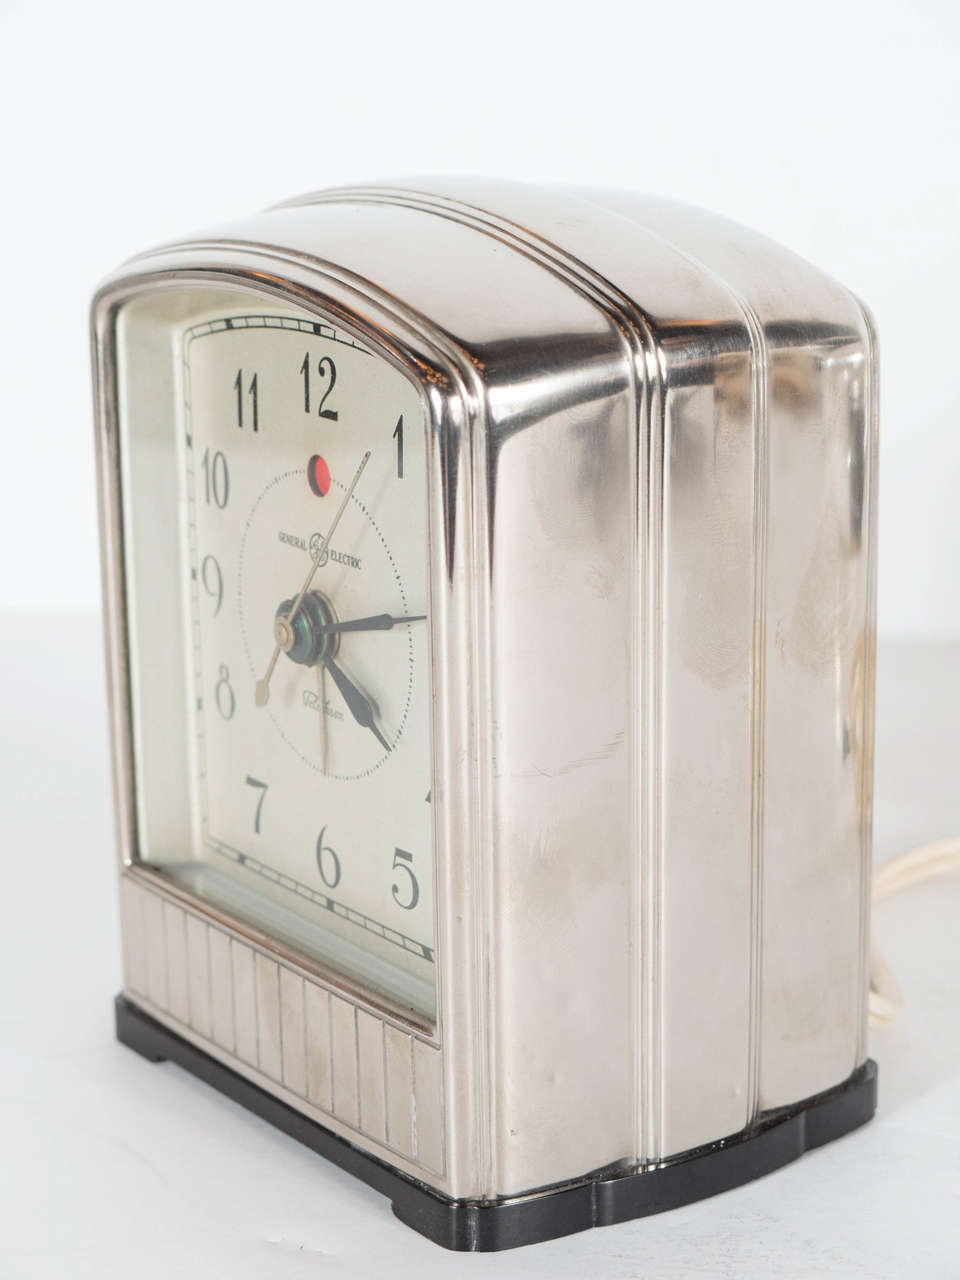 This exceptional streamlined Art Deco electric desk clock is by Telechron. It features a square chrome design with streamlined incised lineal fluted detailing. It rests on a skyscraper style black bakelite base. This clock has a built in light and